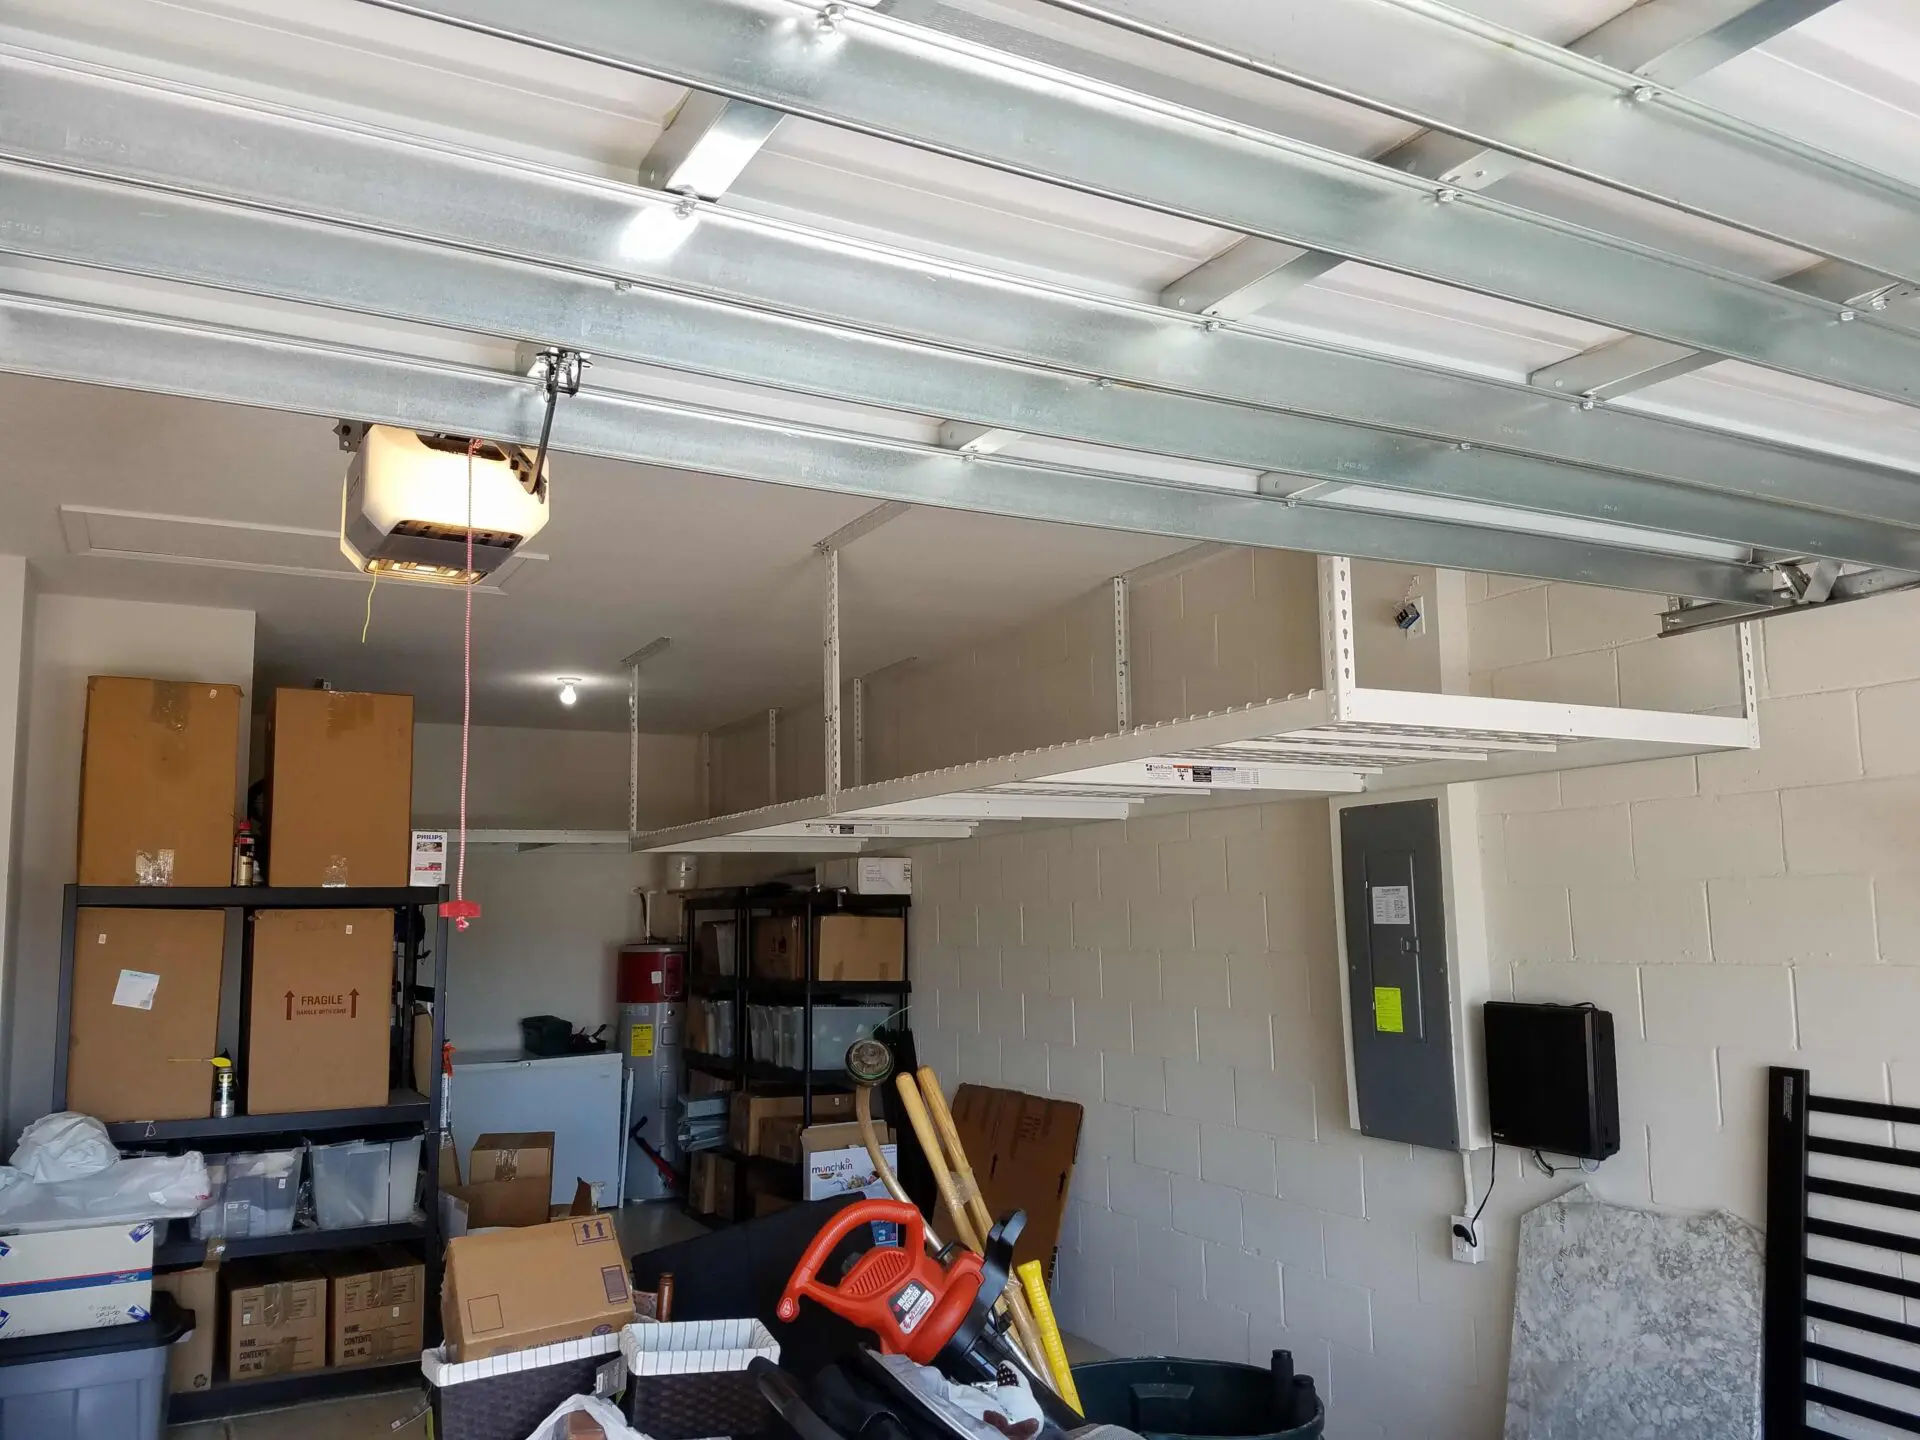 Newly installed overhead rack on one side of the garage